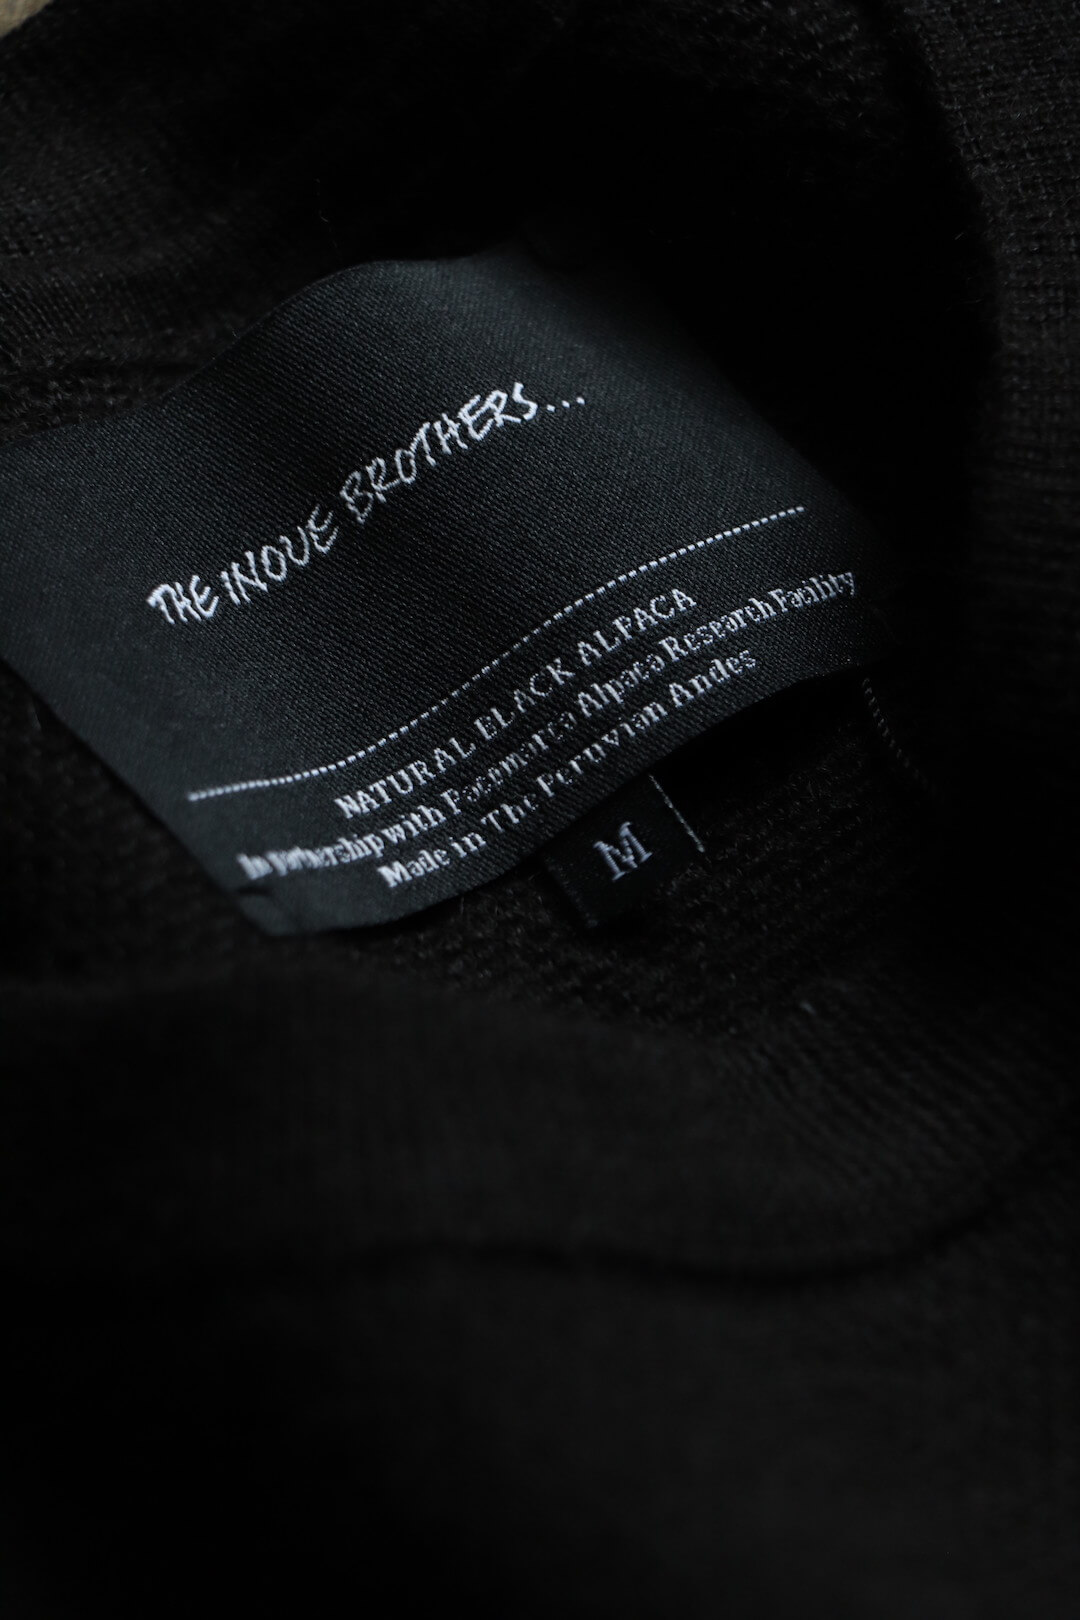 Pure Black Crew Neck - The Inoue Brothers - ARCH ONLINE SHOP